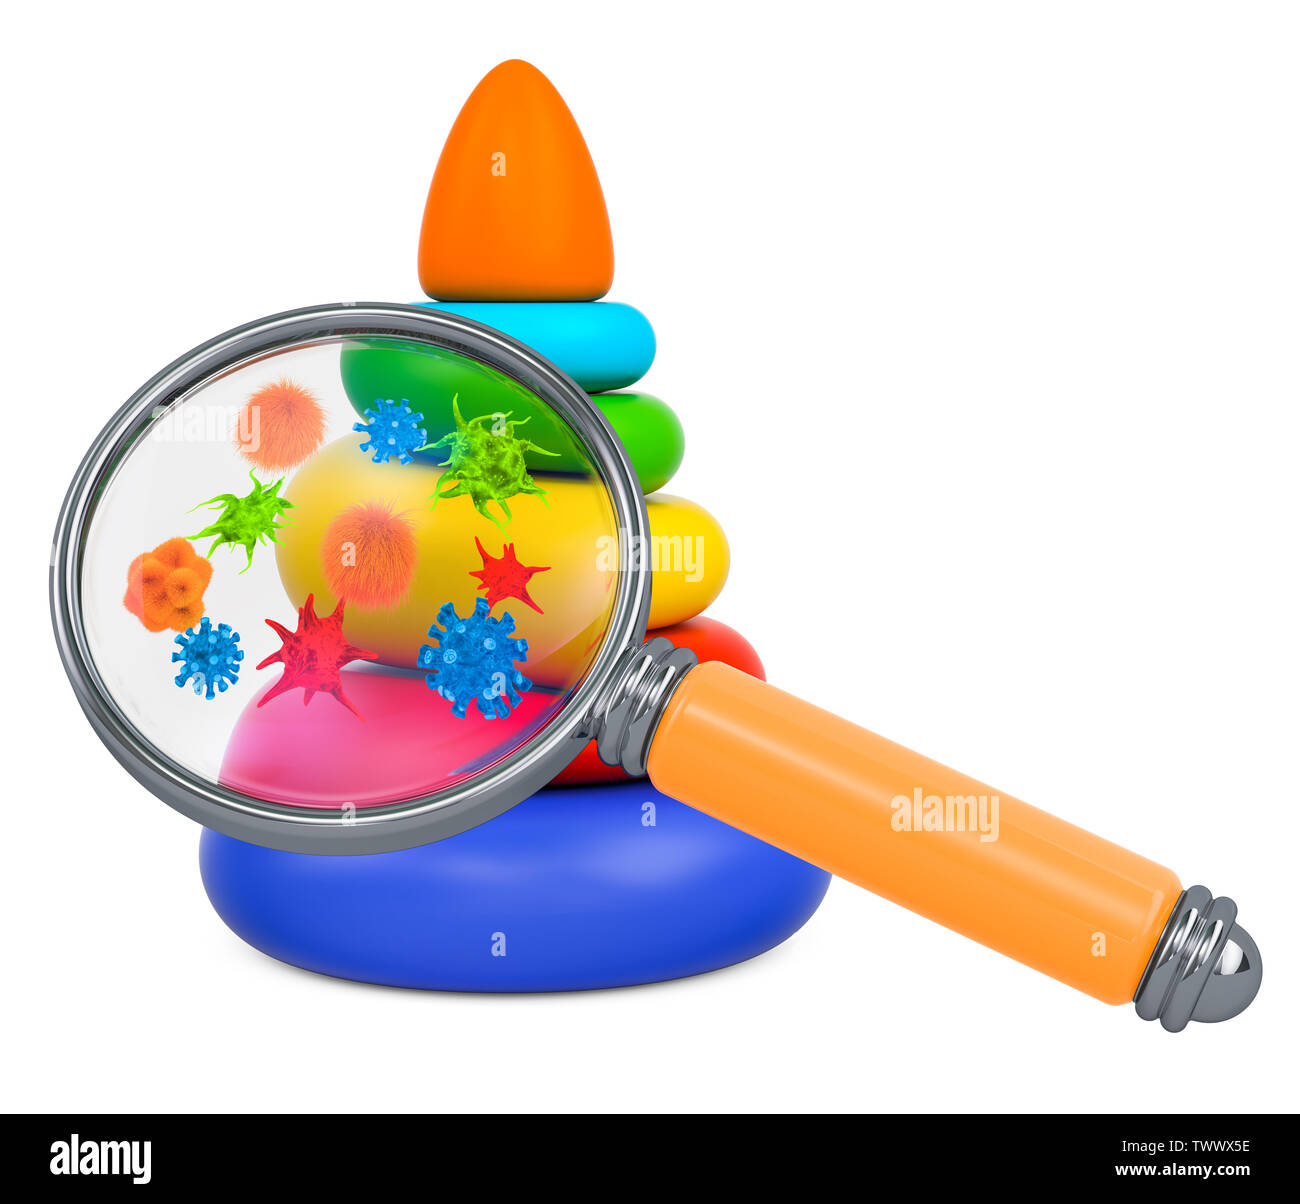 Pyramid toy with germs and bacterias under magnifying glass. 3D rendering Stock Photo